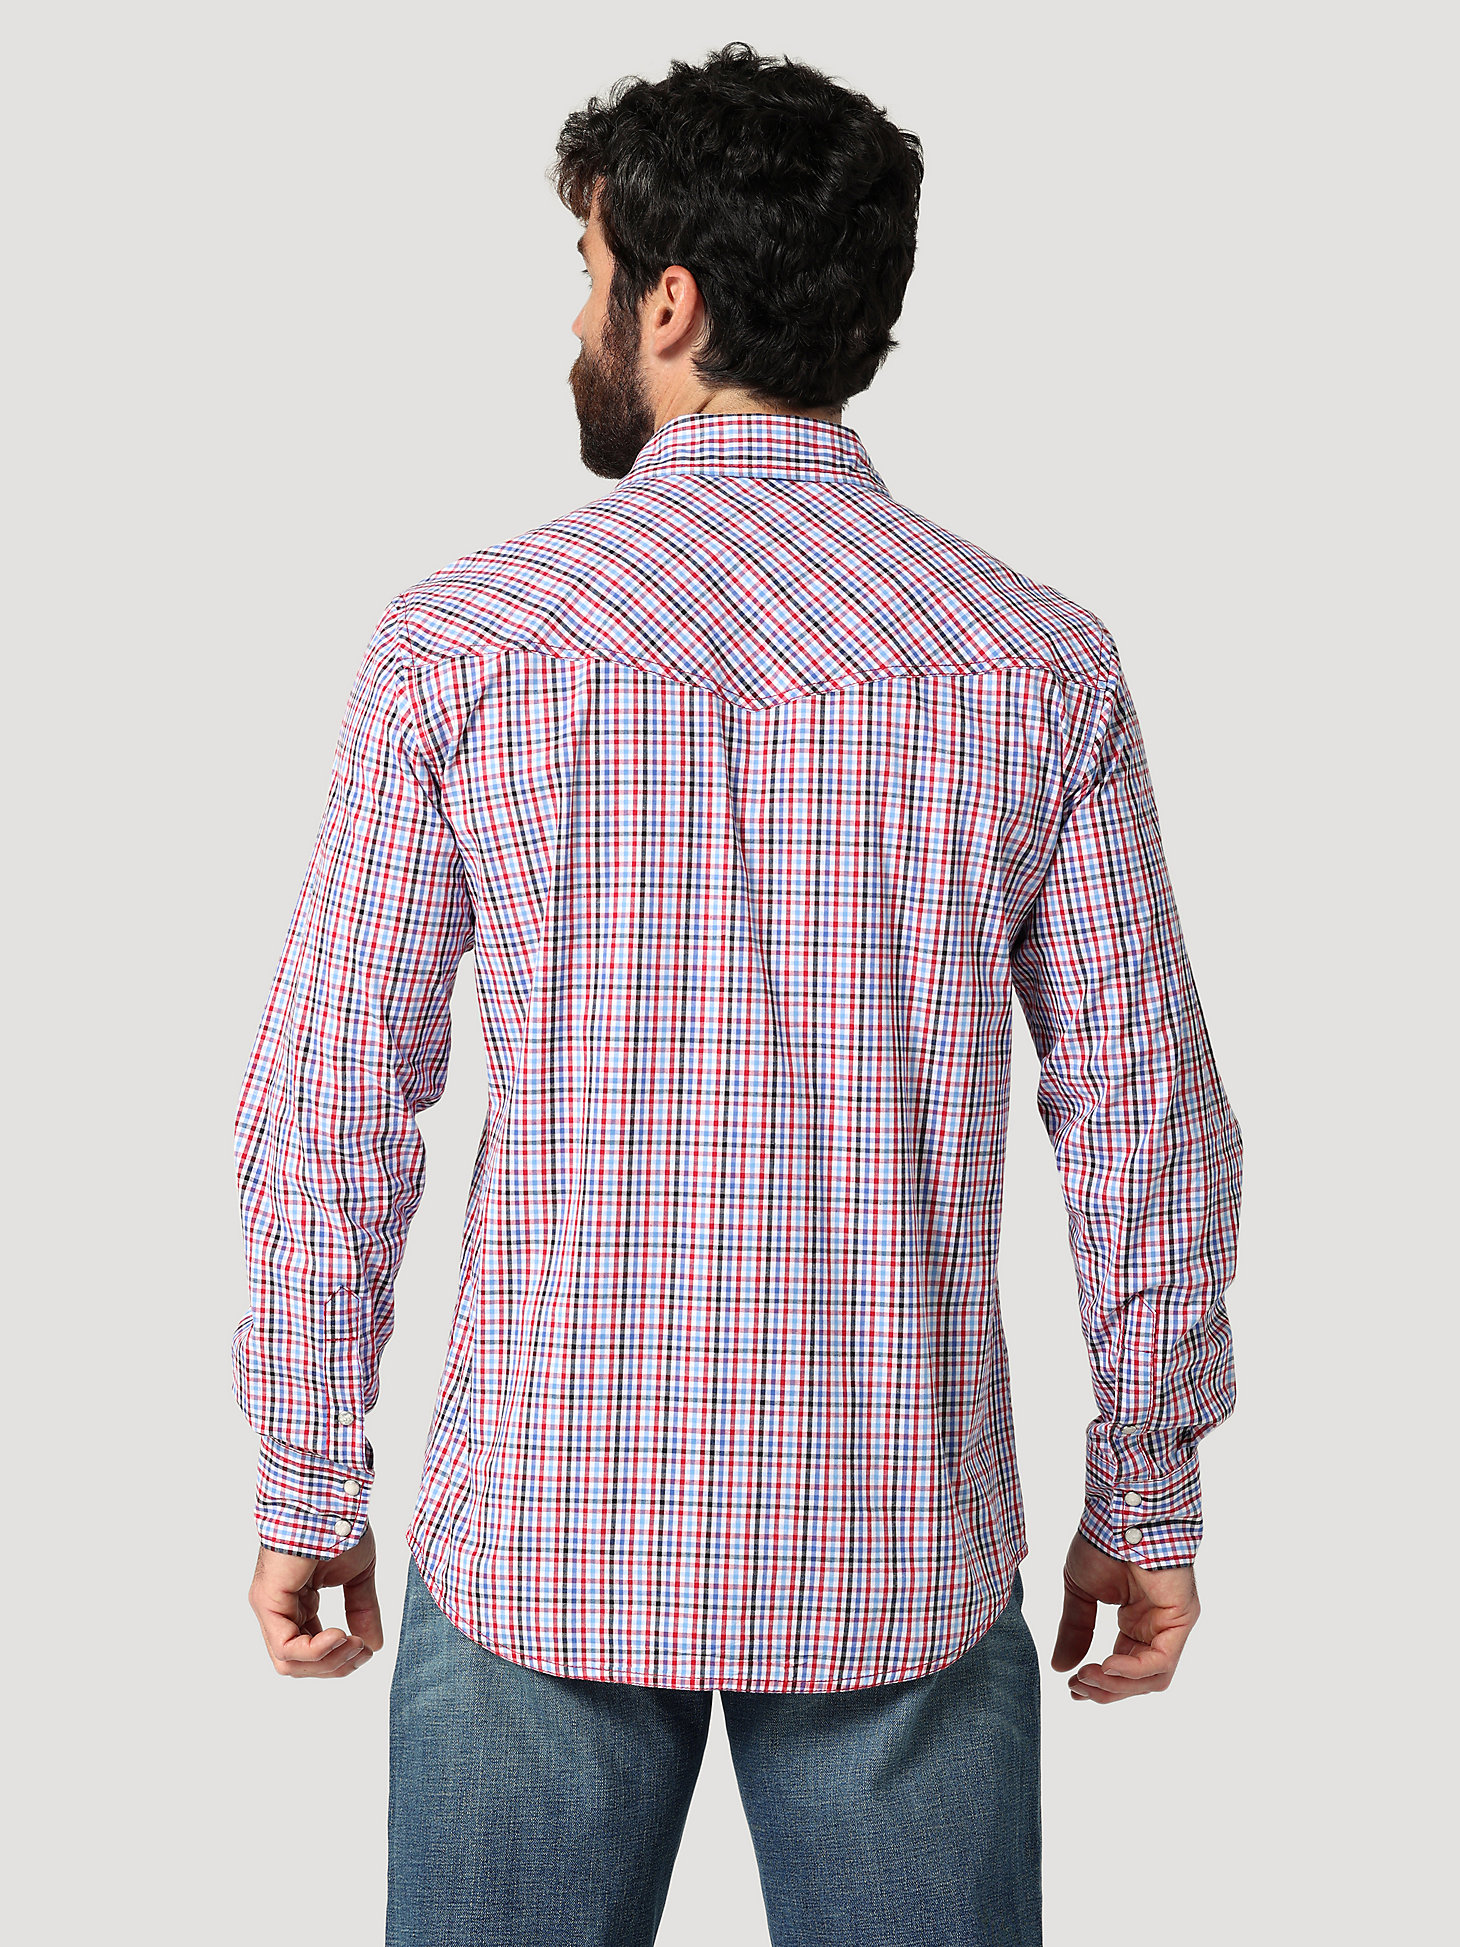 Men's Wrangler® 20X® Competition Advanced Comfort Long Sleeve Two Pocket Western Snap Plaid Shirt in Fine Red alternative view 1